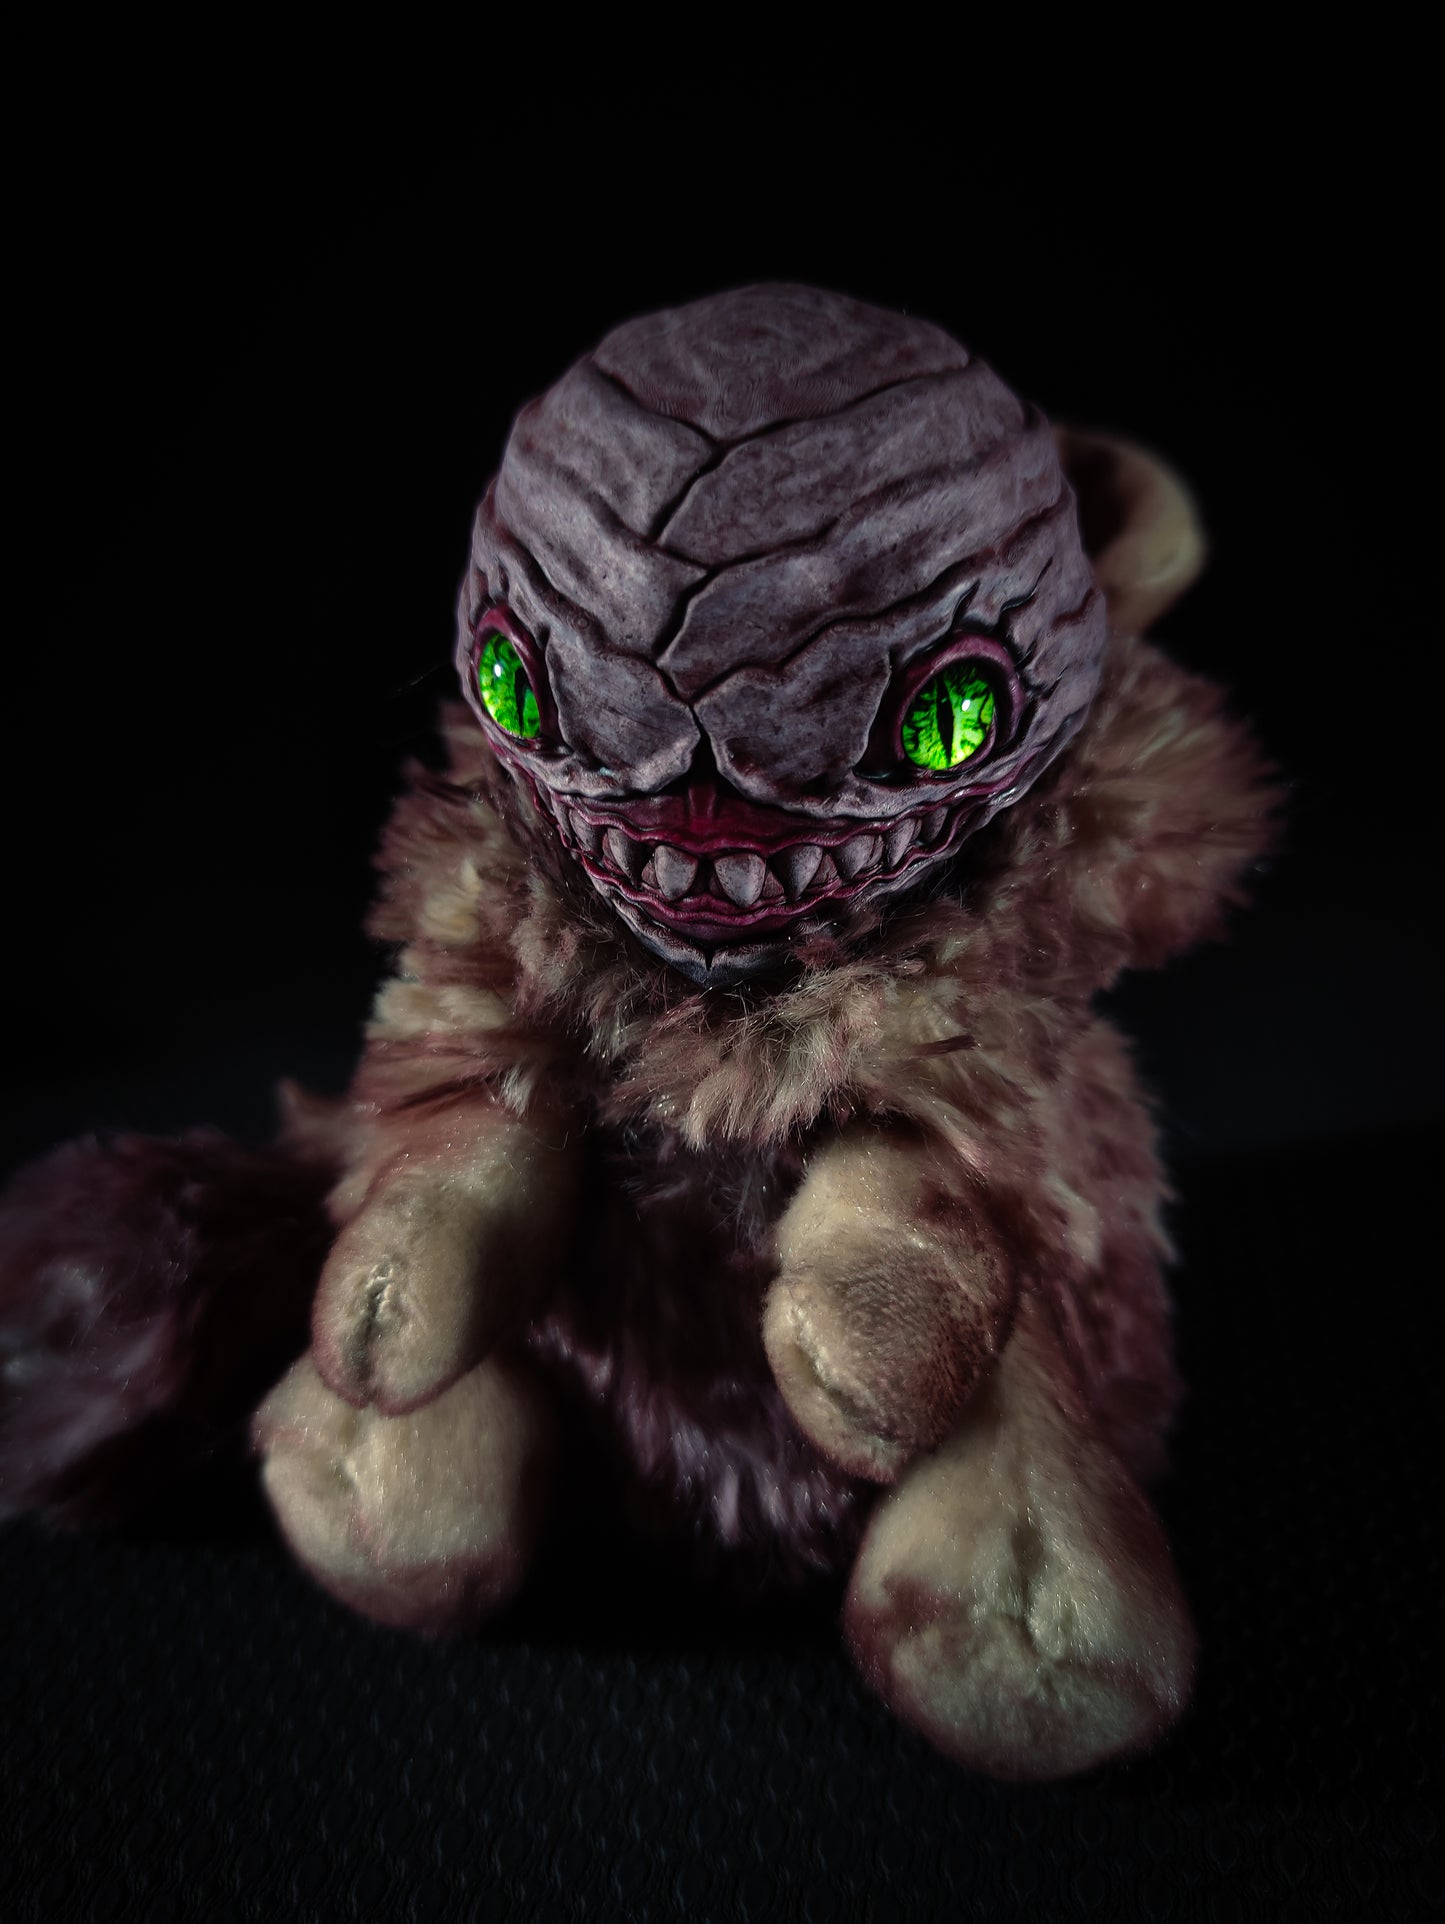 Raodin - FREAPERS Cryptid Art Doll Plush Toy